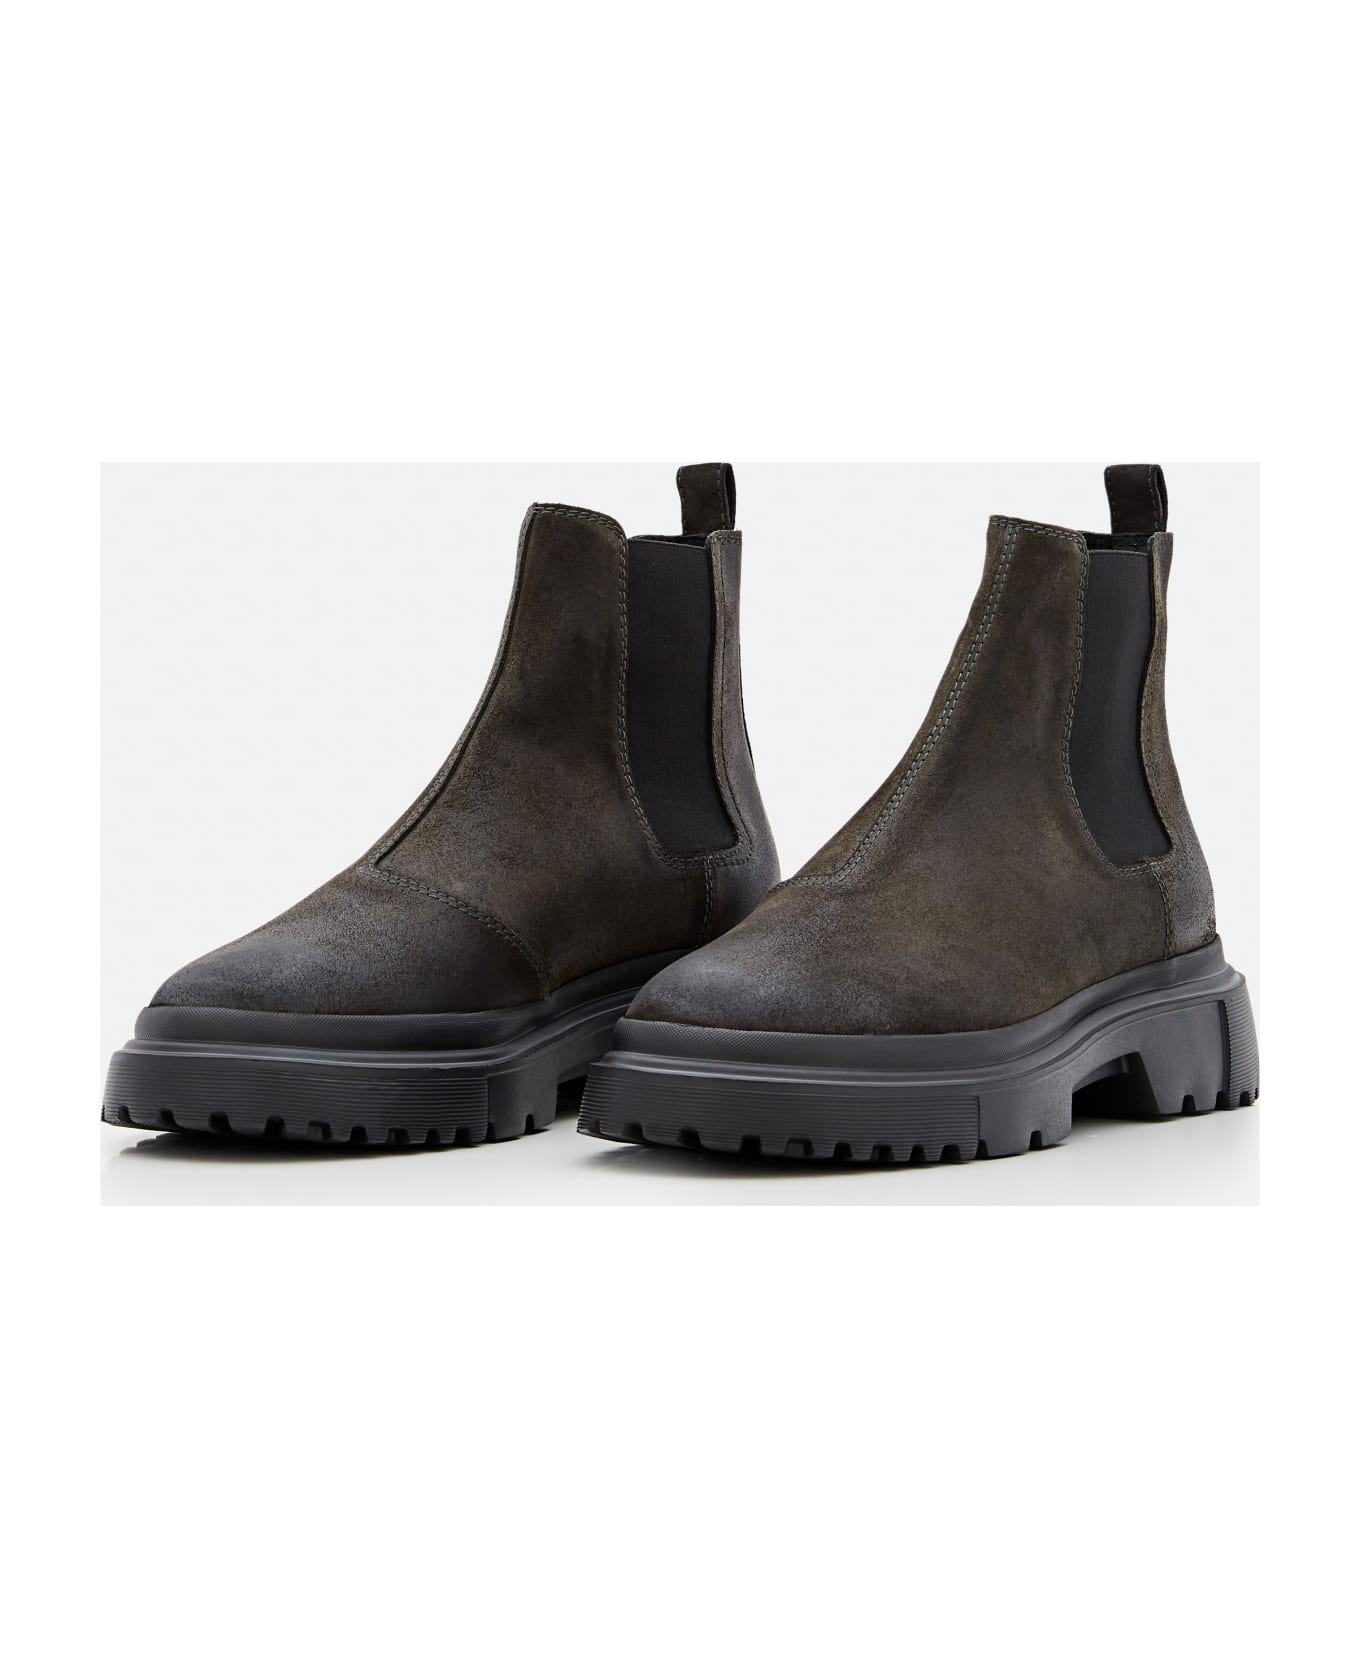 Hogan H629 Chelsea Ankle Boots - ANTRACITE ブーツ